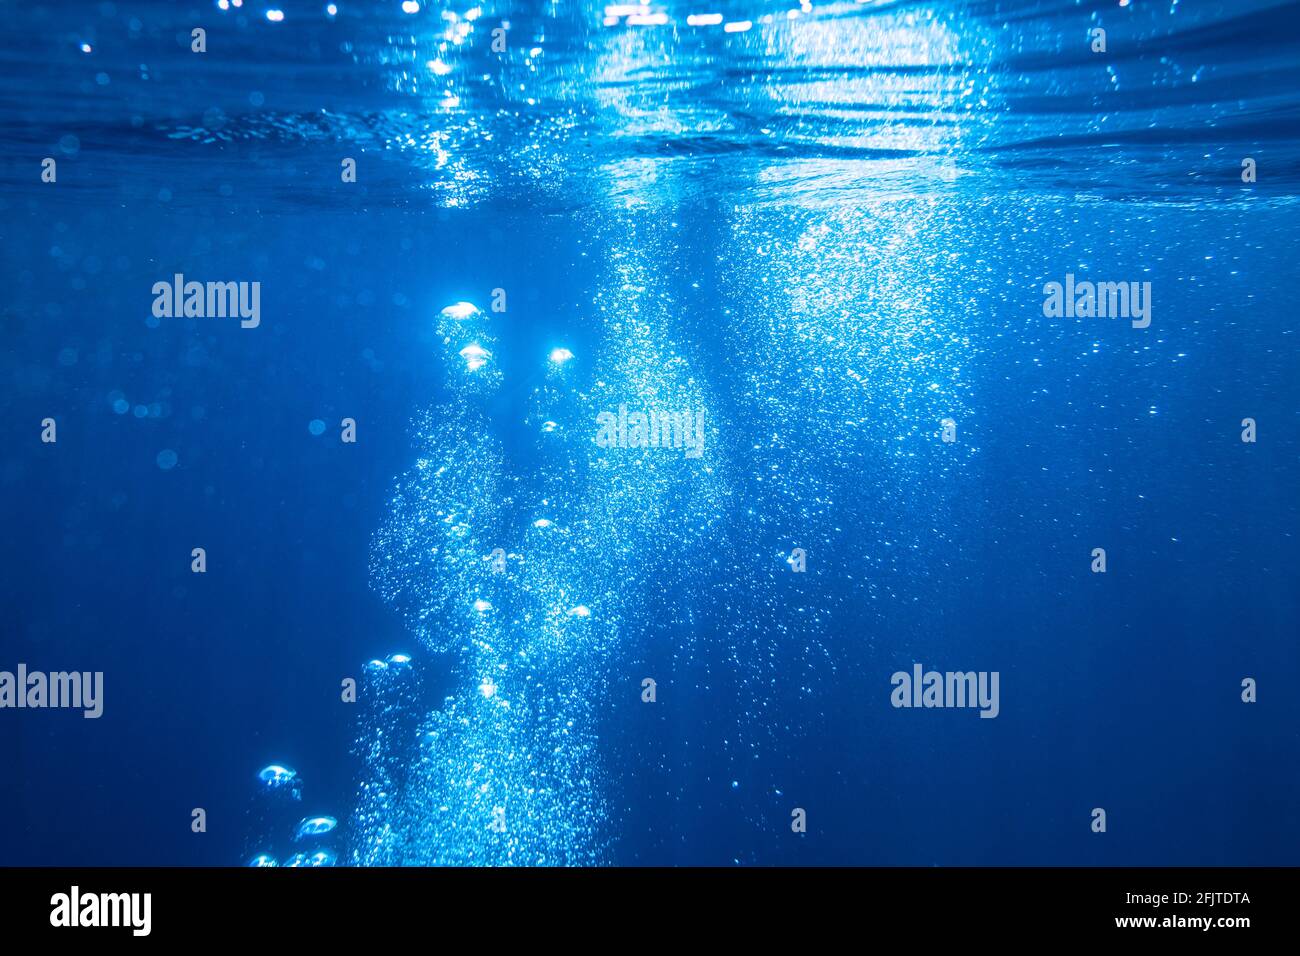 Abstract underwater background with air bubbles Stock Photo